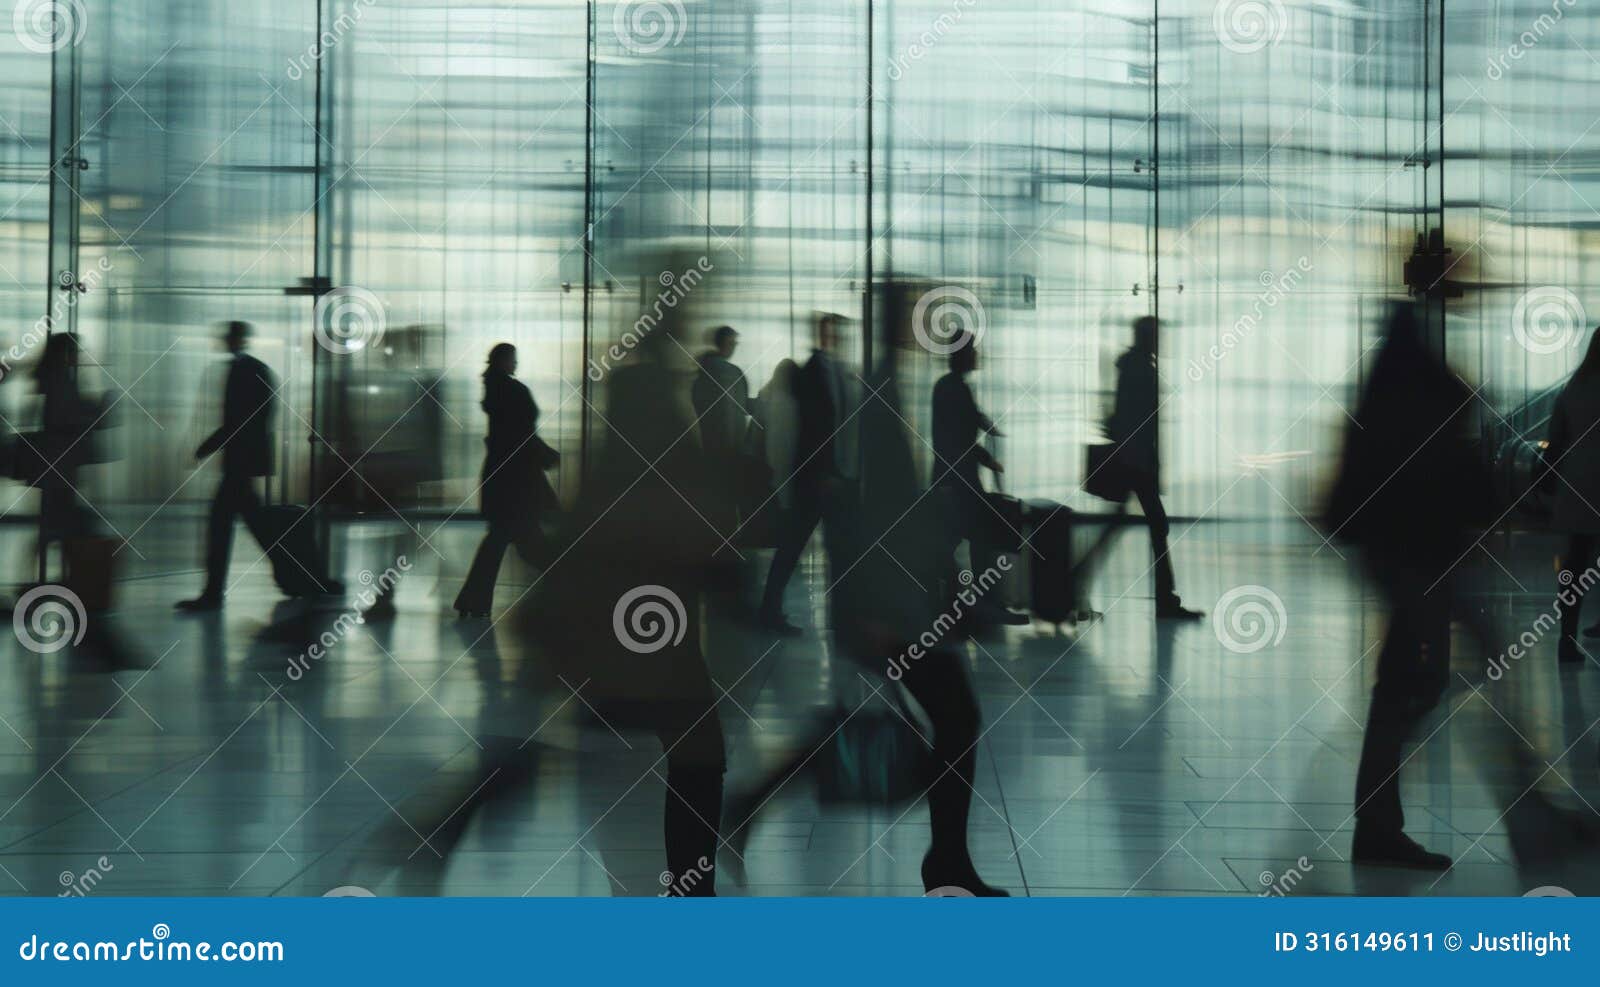 softly blurred silhouettes of travelers and workers moving through the terminal creating an atmosphere of anonymity and